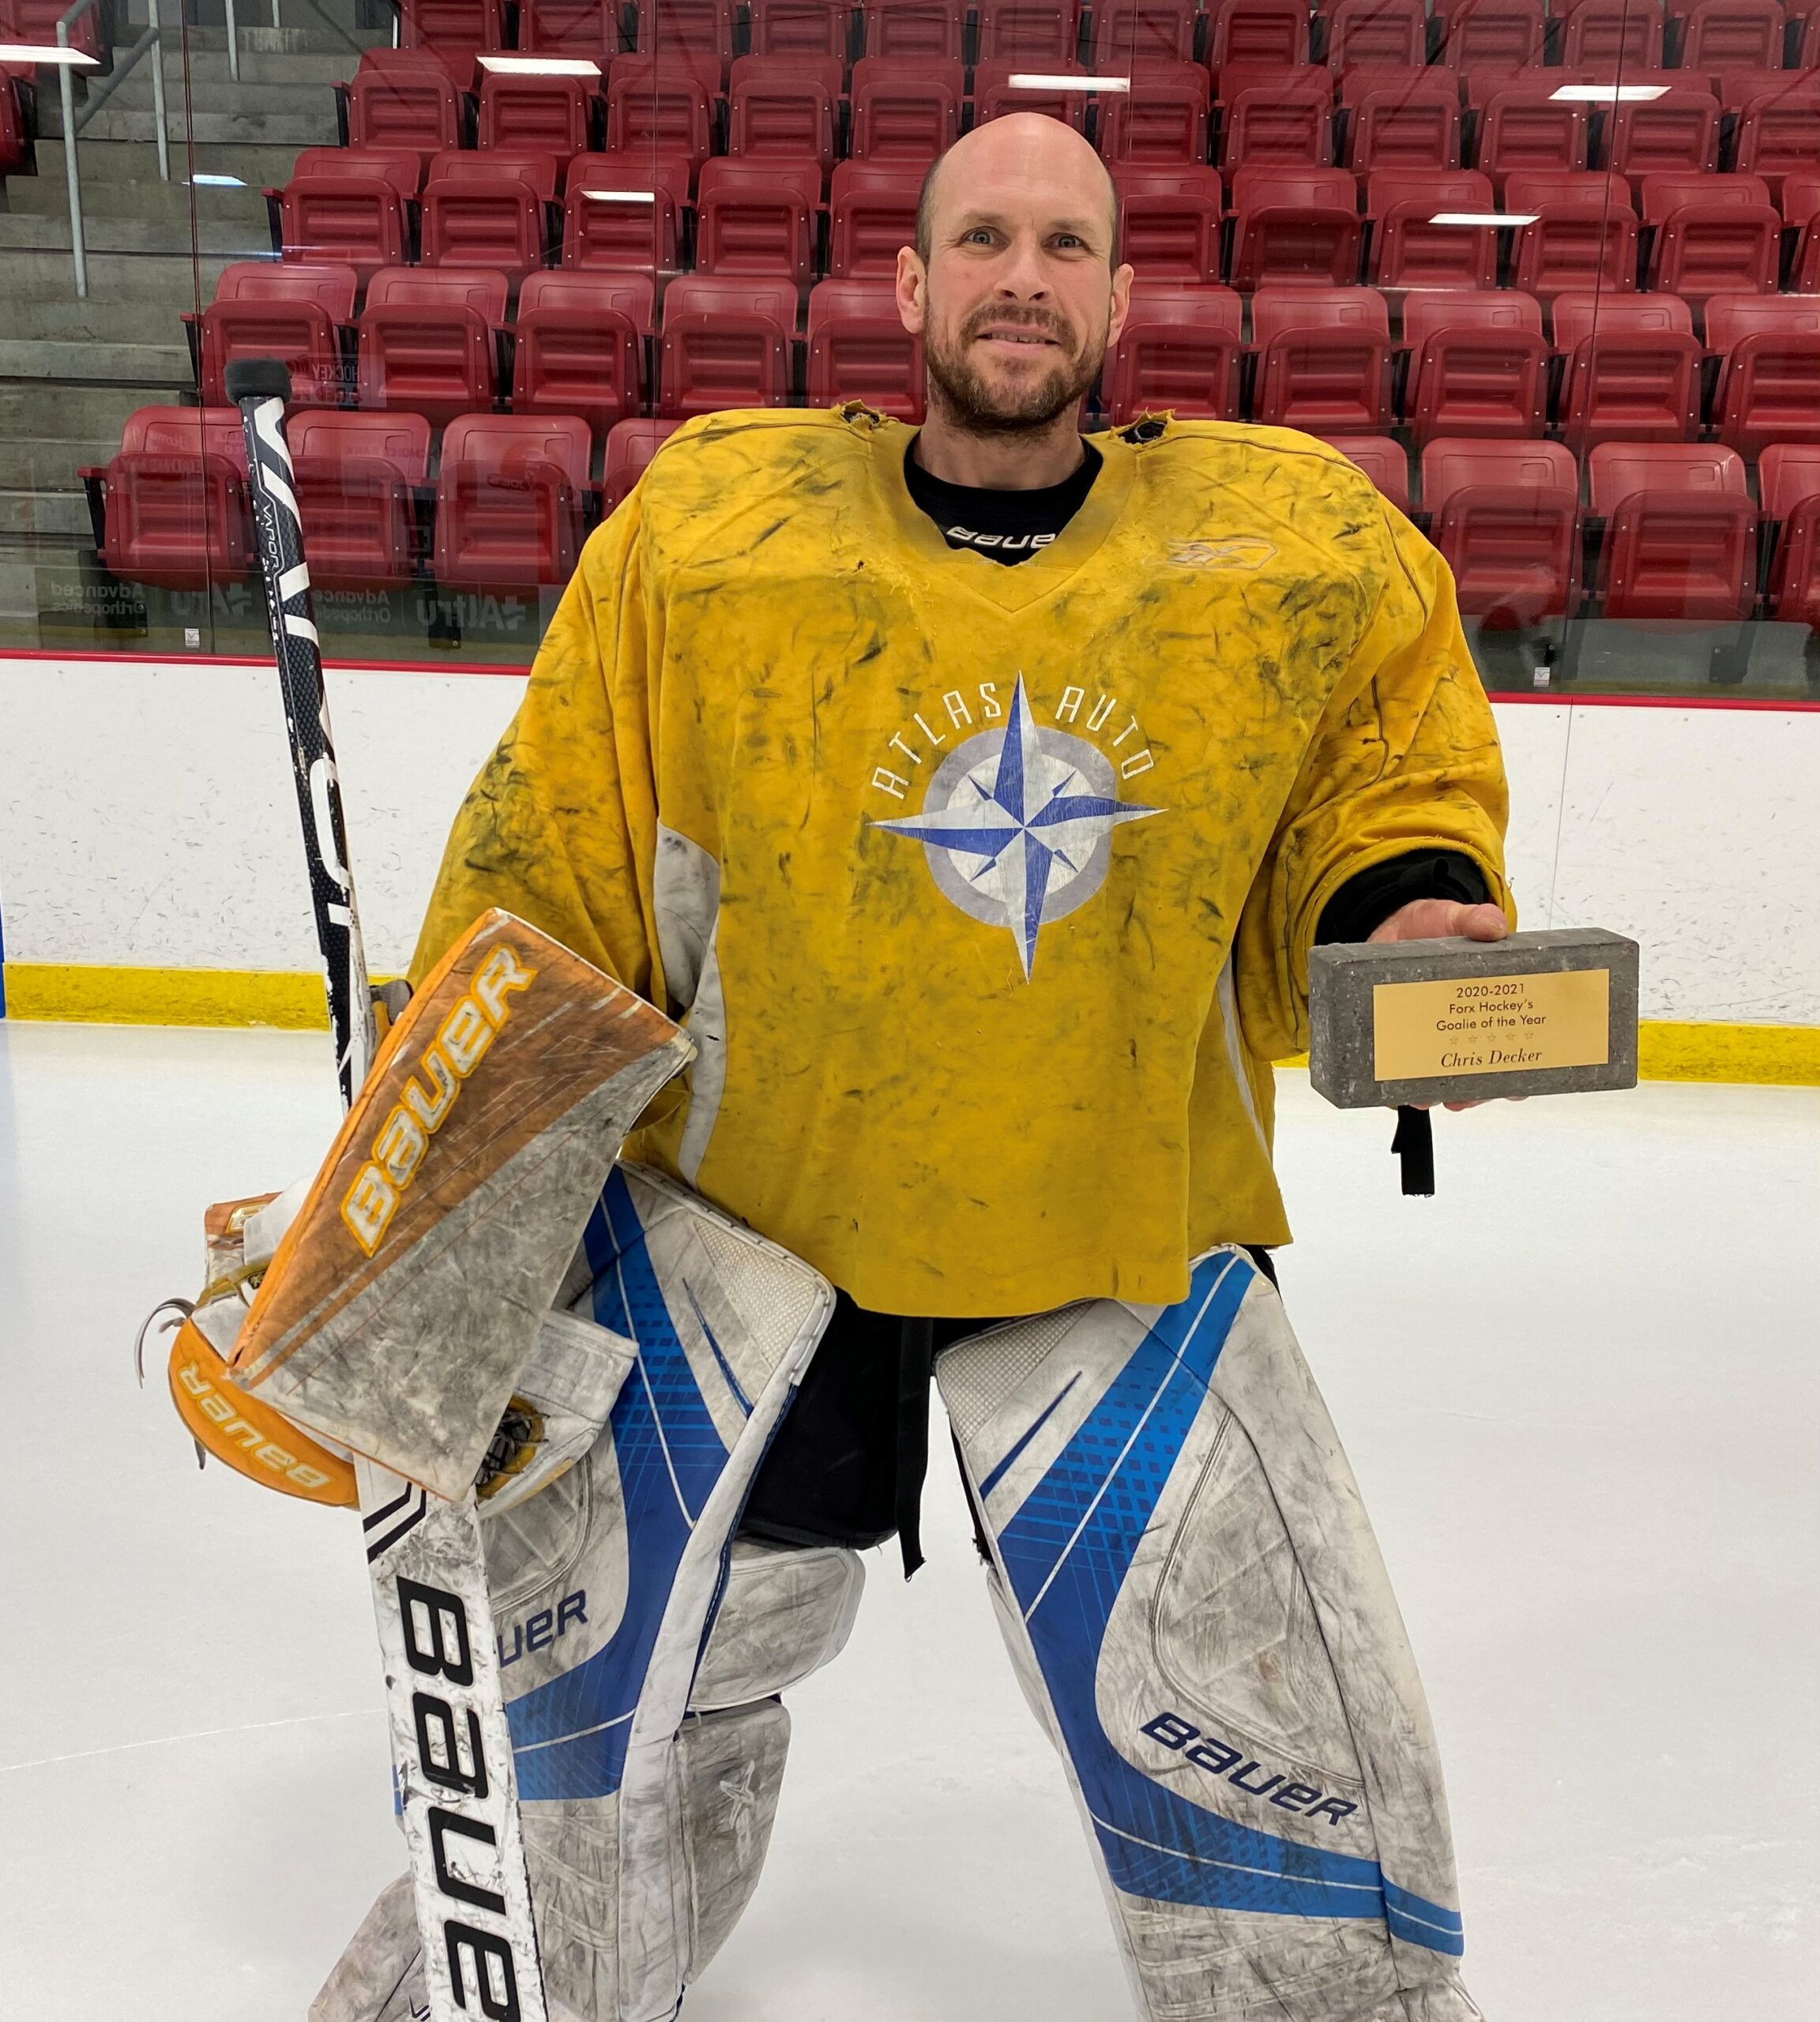 Co-Goalie of the Year-Chris Decker-The Peoples Goalie